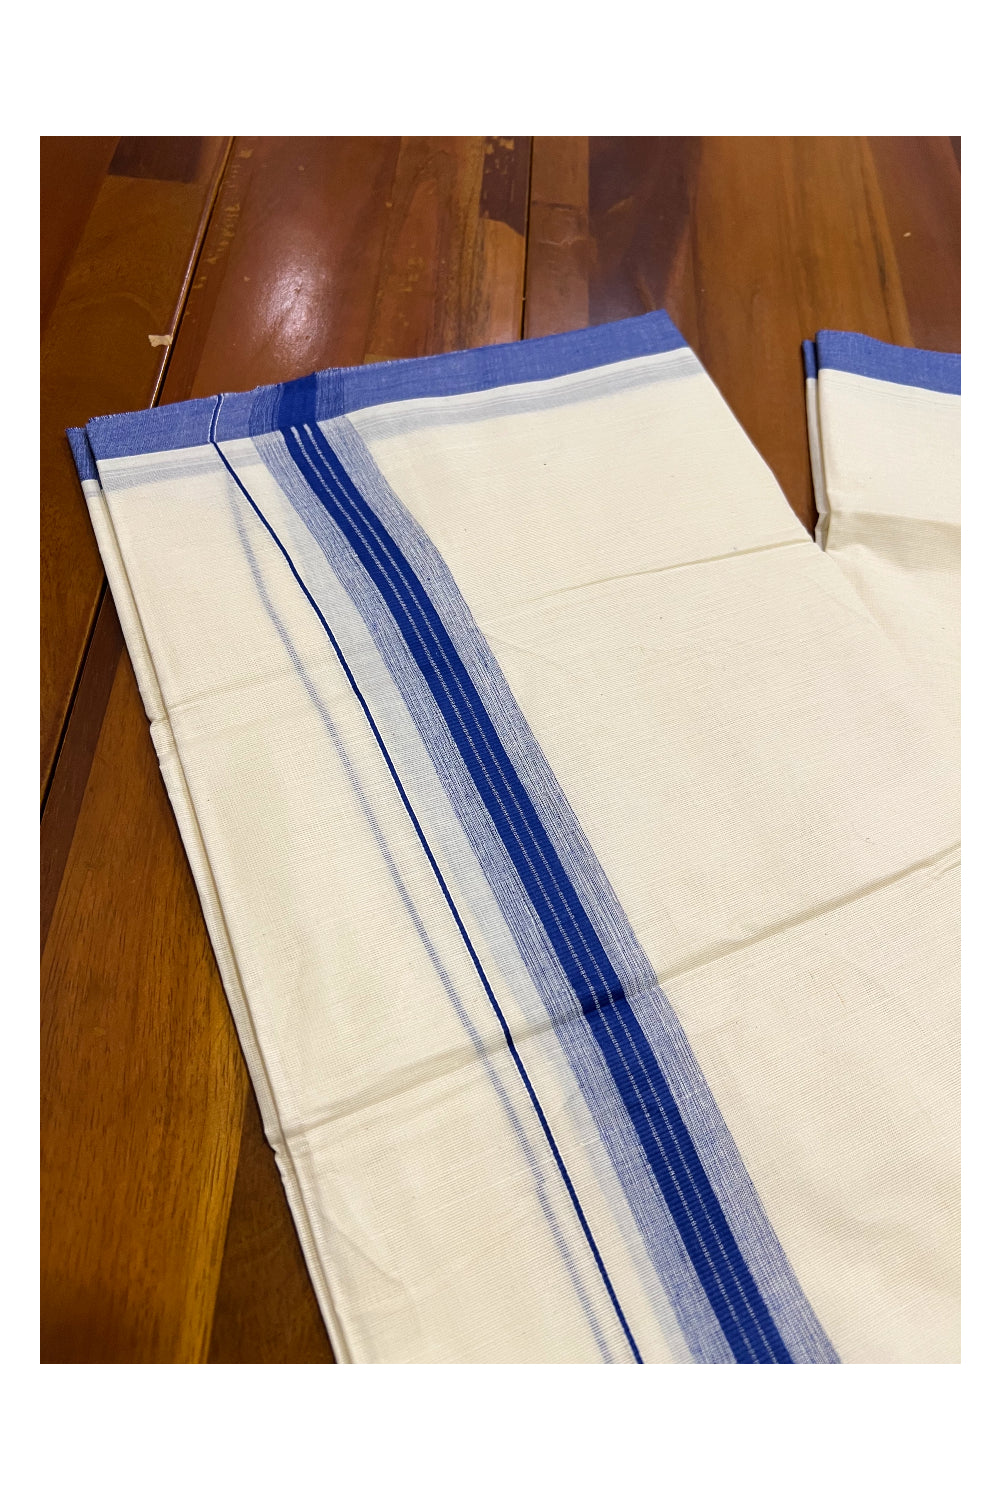 Pure Cotton Off White Double Mundu with Blue Border (South Indian Dhoti)